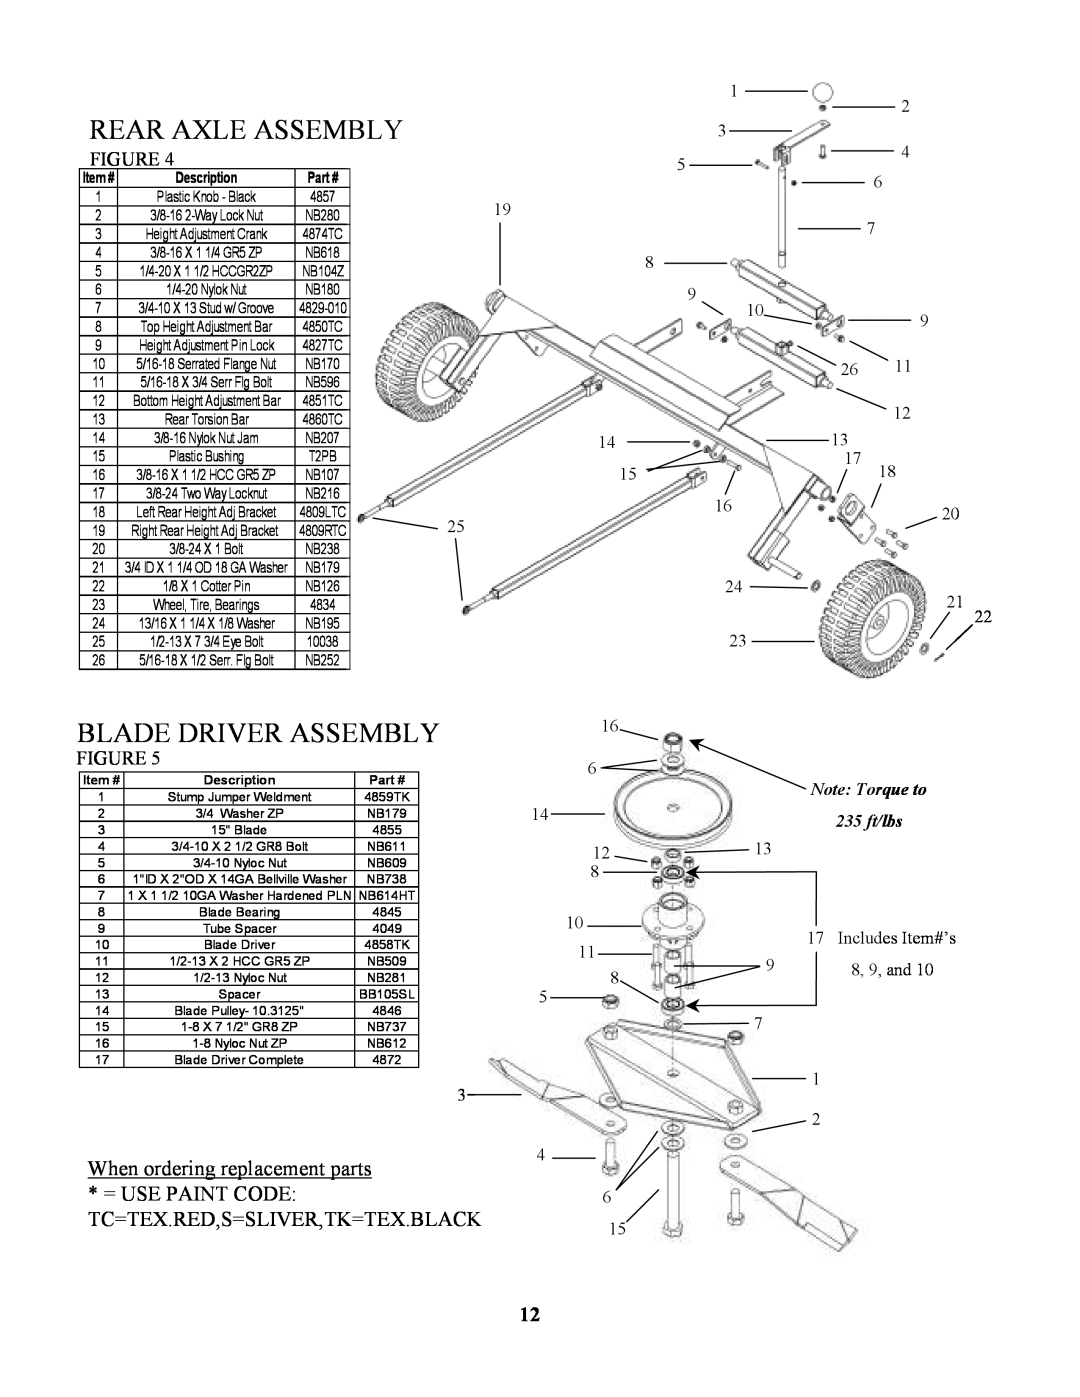 Swisher RTB1254412V, POLB10544HD, RTB105441 Rear Axle Assembly, Blade Driver Assembly, When ordering replacement parts 